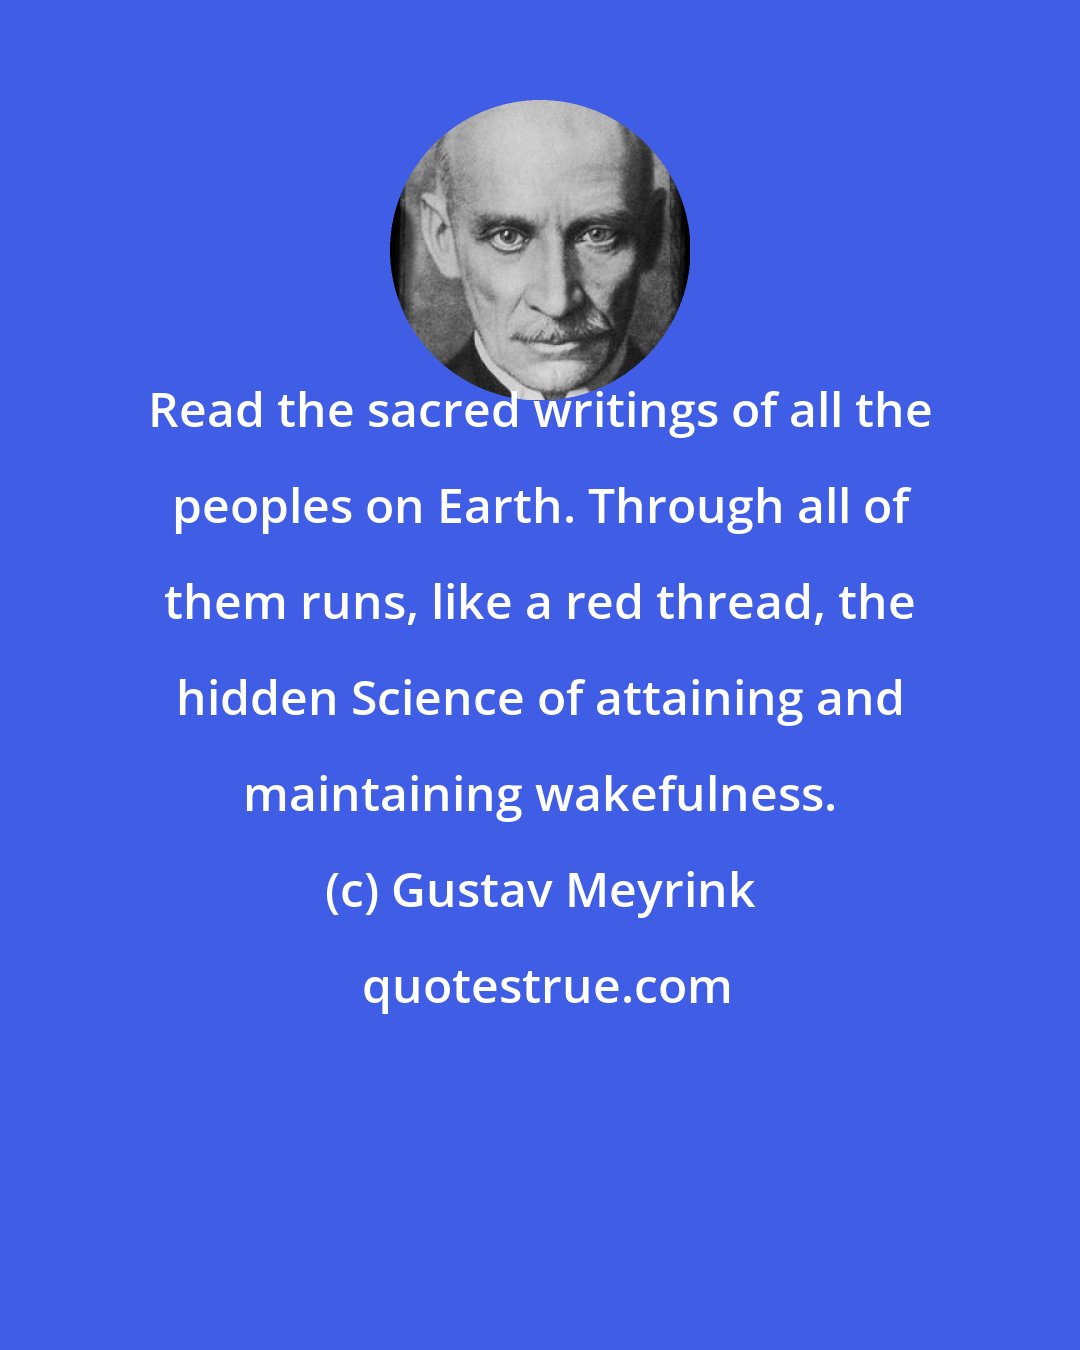 Gustav Meyrink: Read the sacred writings of all the peoples on Earth. Through all of them runs, like a red thread, the hidden Science of attaining and maintaining wakefulness.